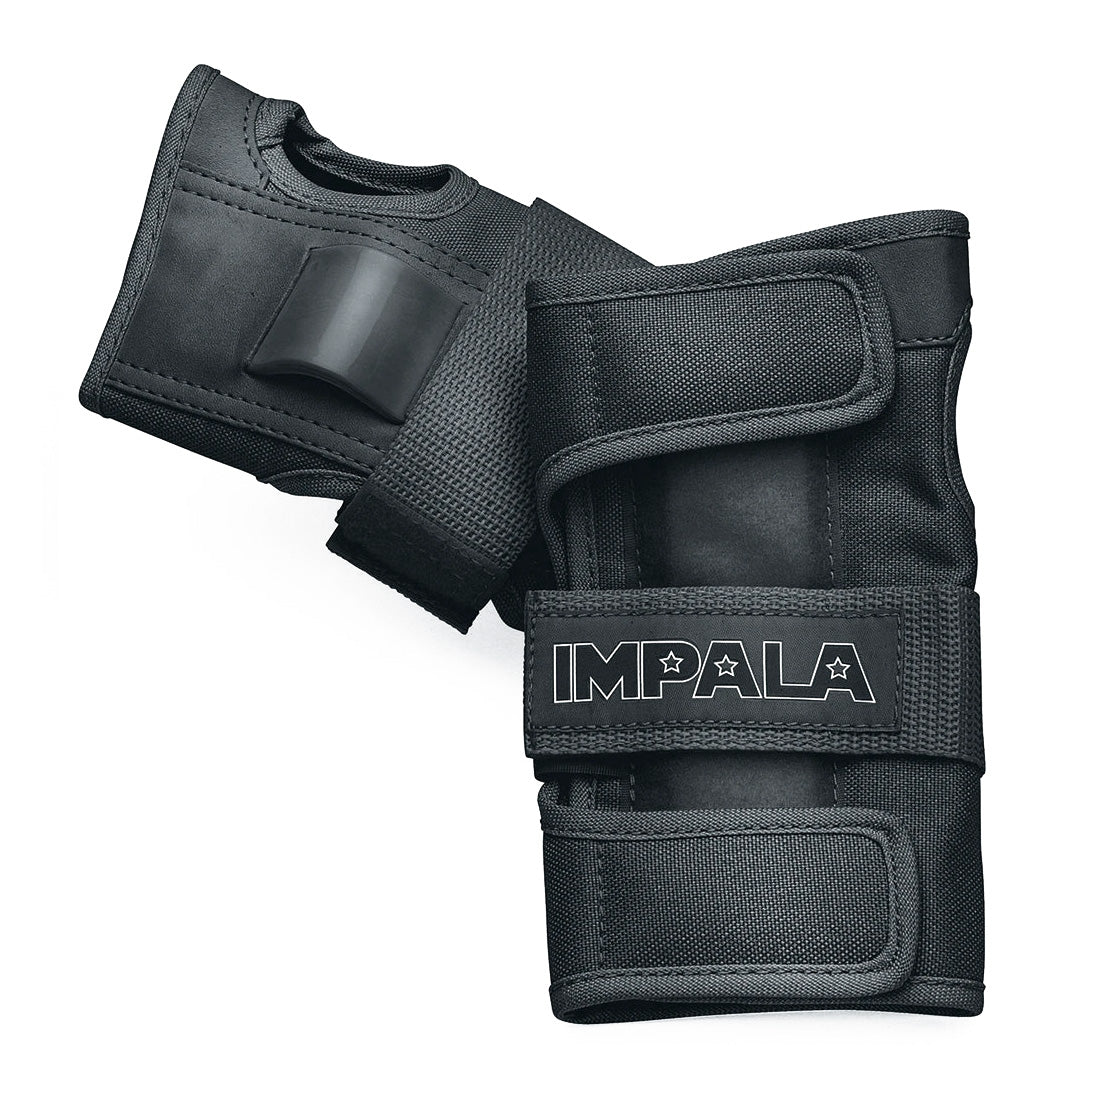 Impala Tri Pack Black - Adult Protective Gear